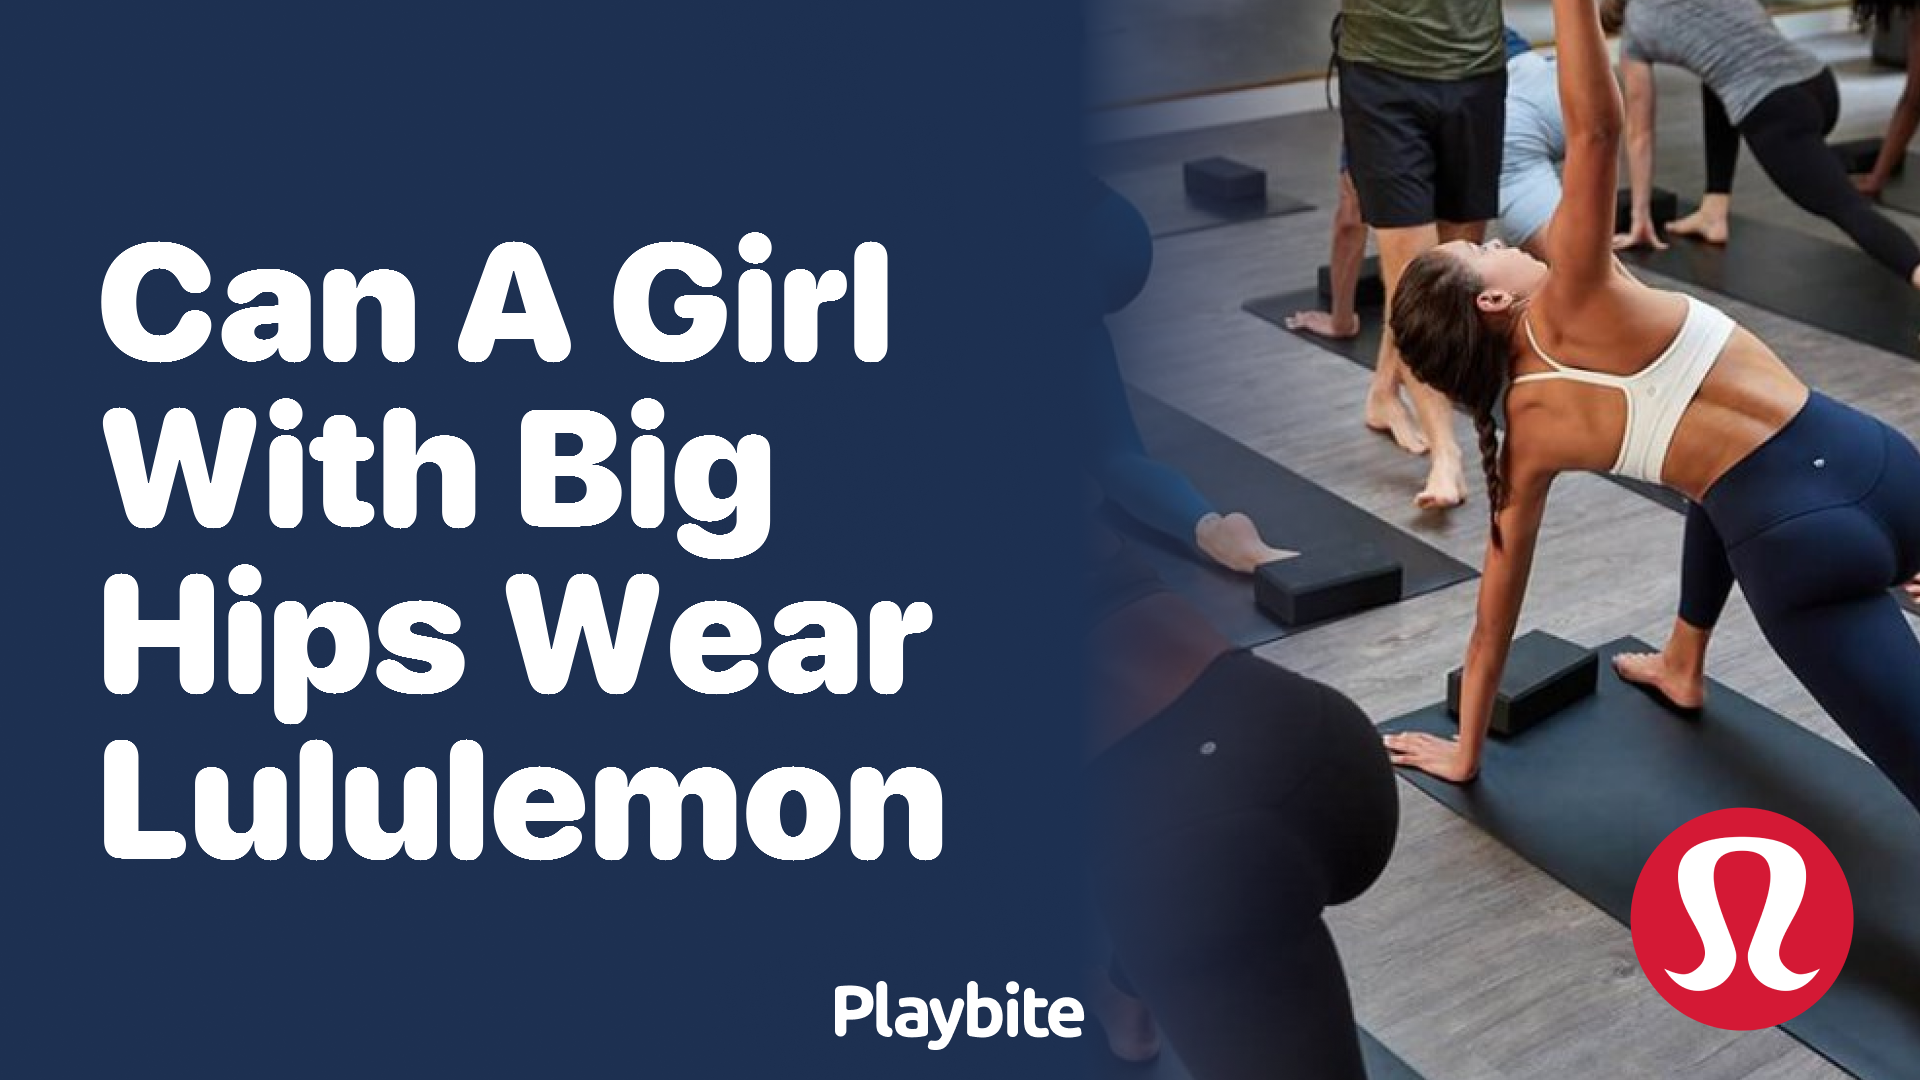 Can a Girl with Big Hips Wear Lululemon? Find Out! - Playbite